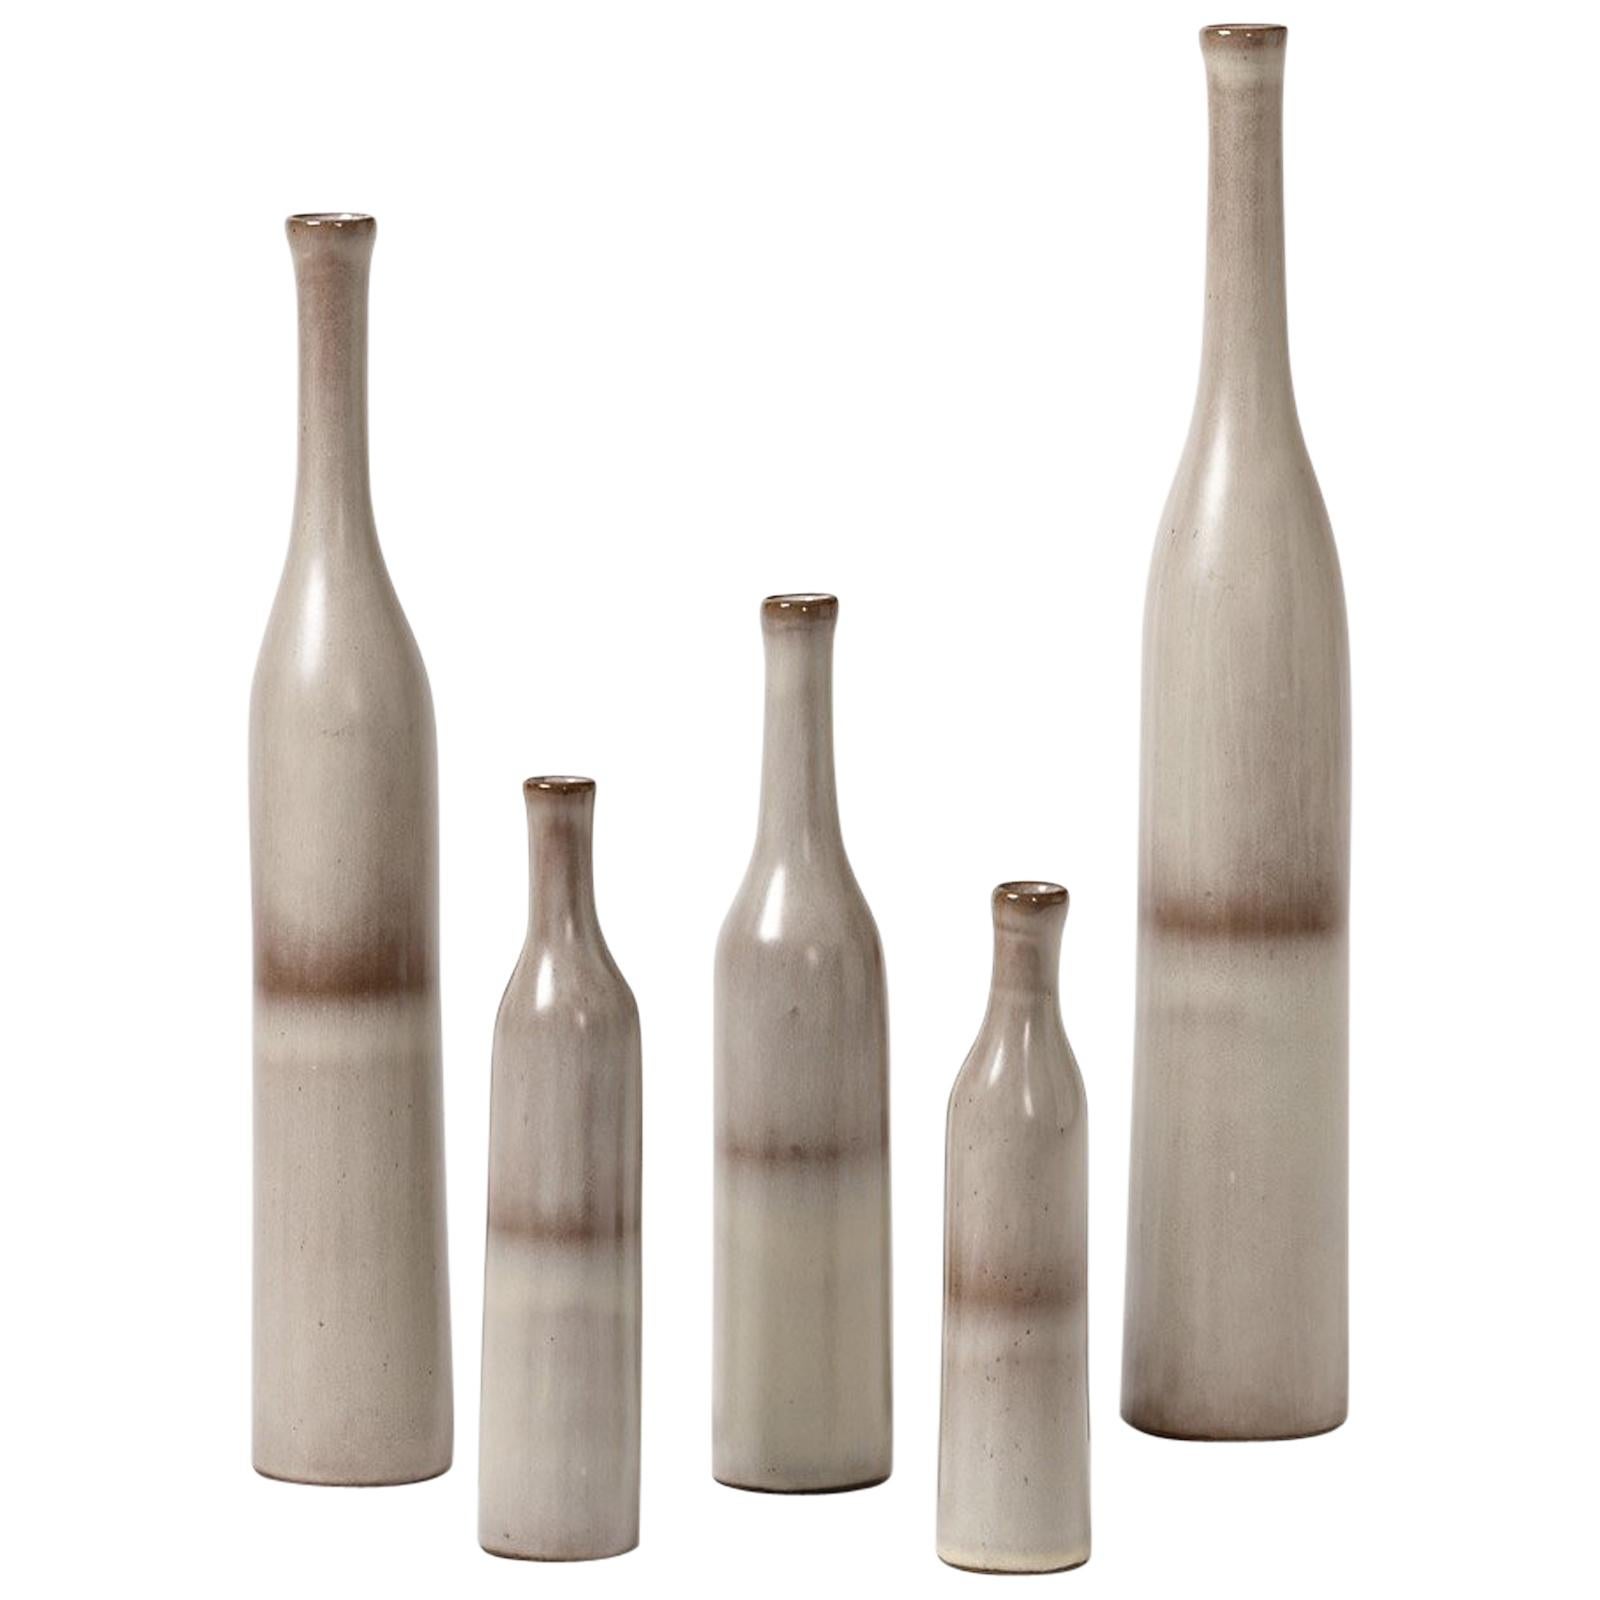 Set of 5 Ceramic Bottles White and Grey Colors by Ruelland Midcentury Design